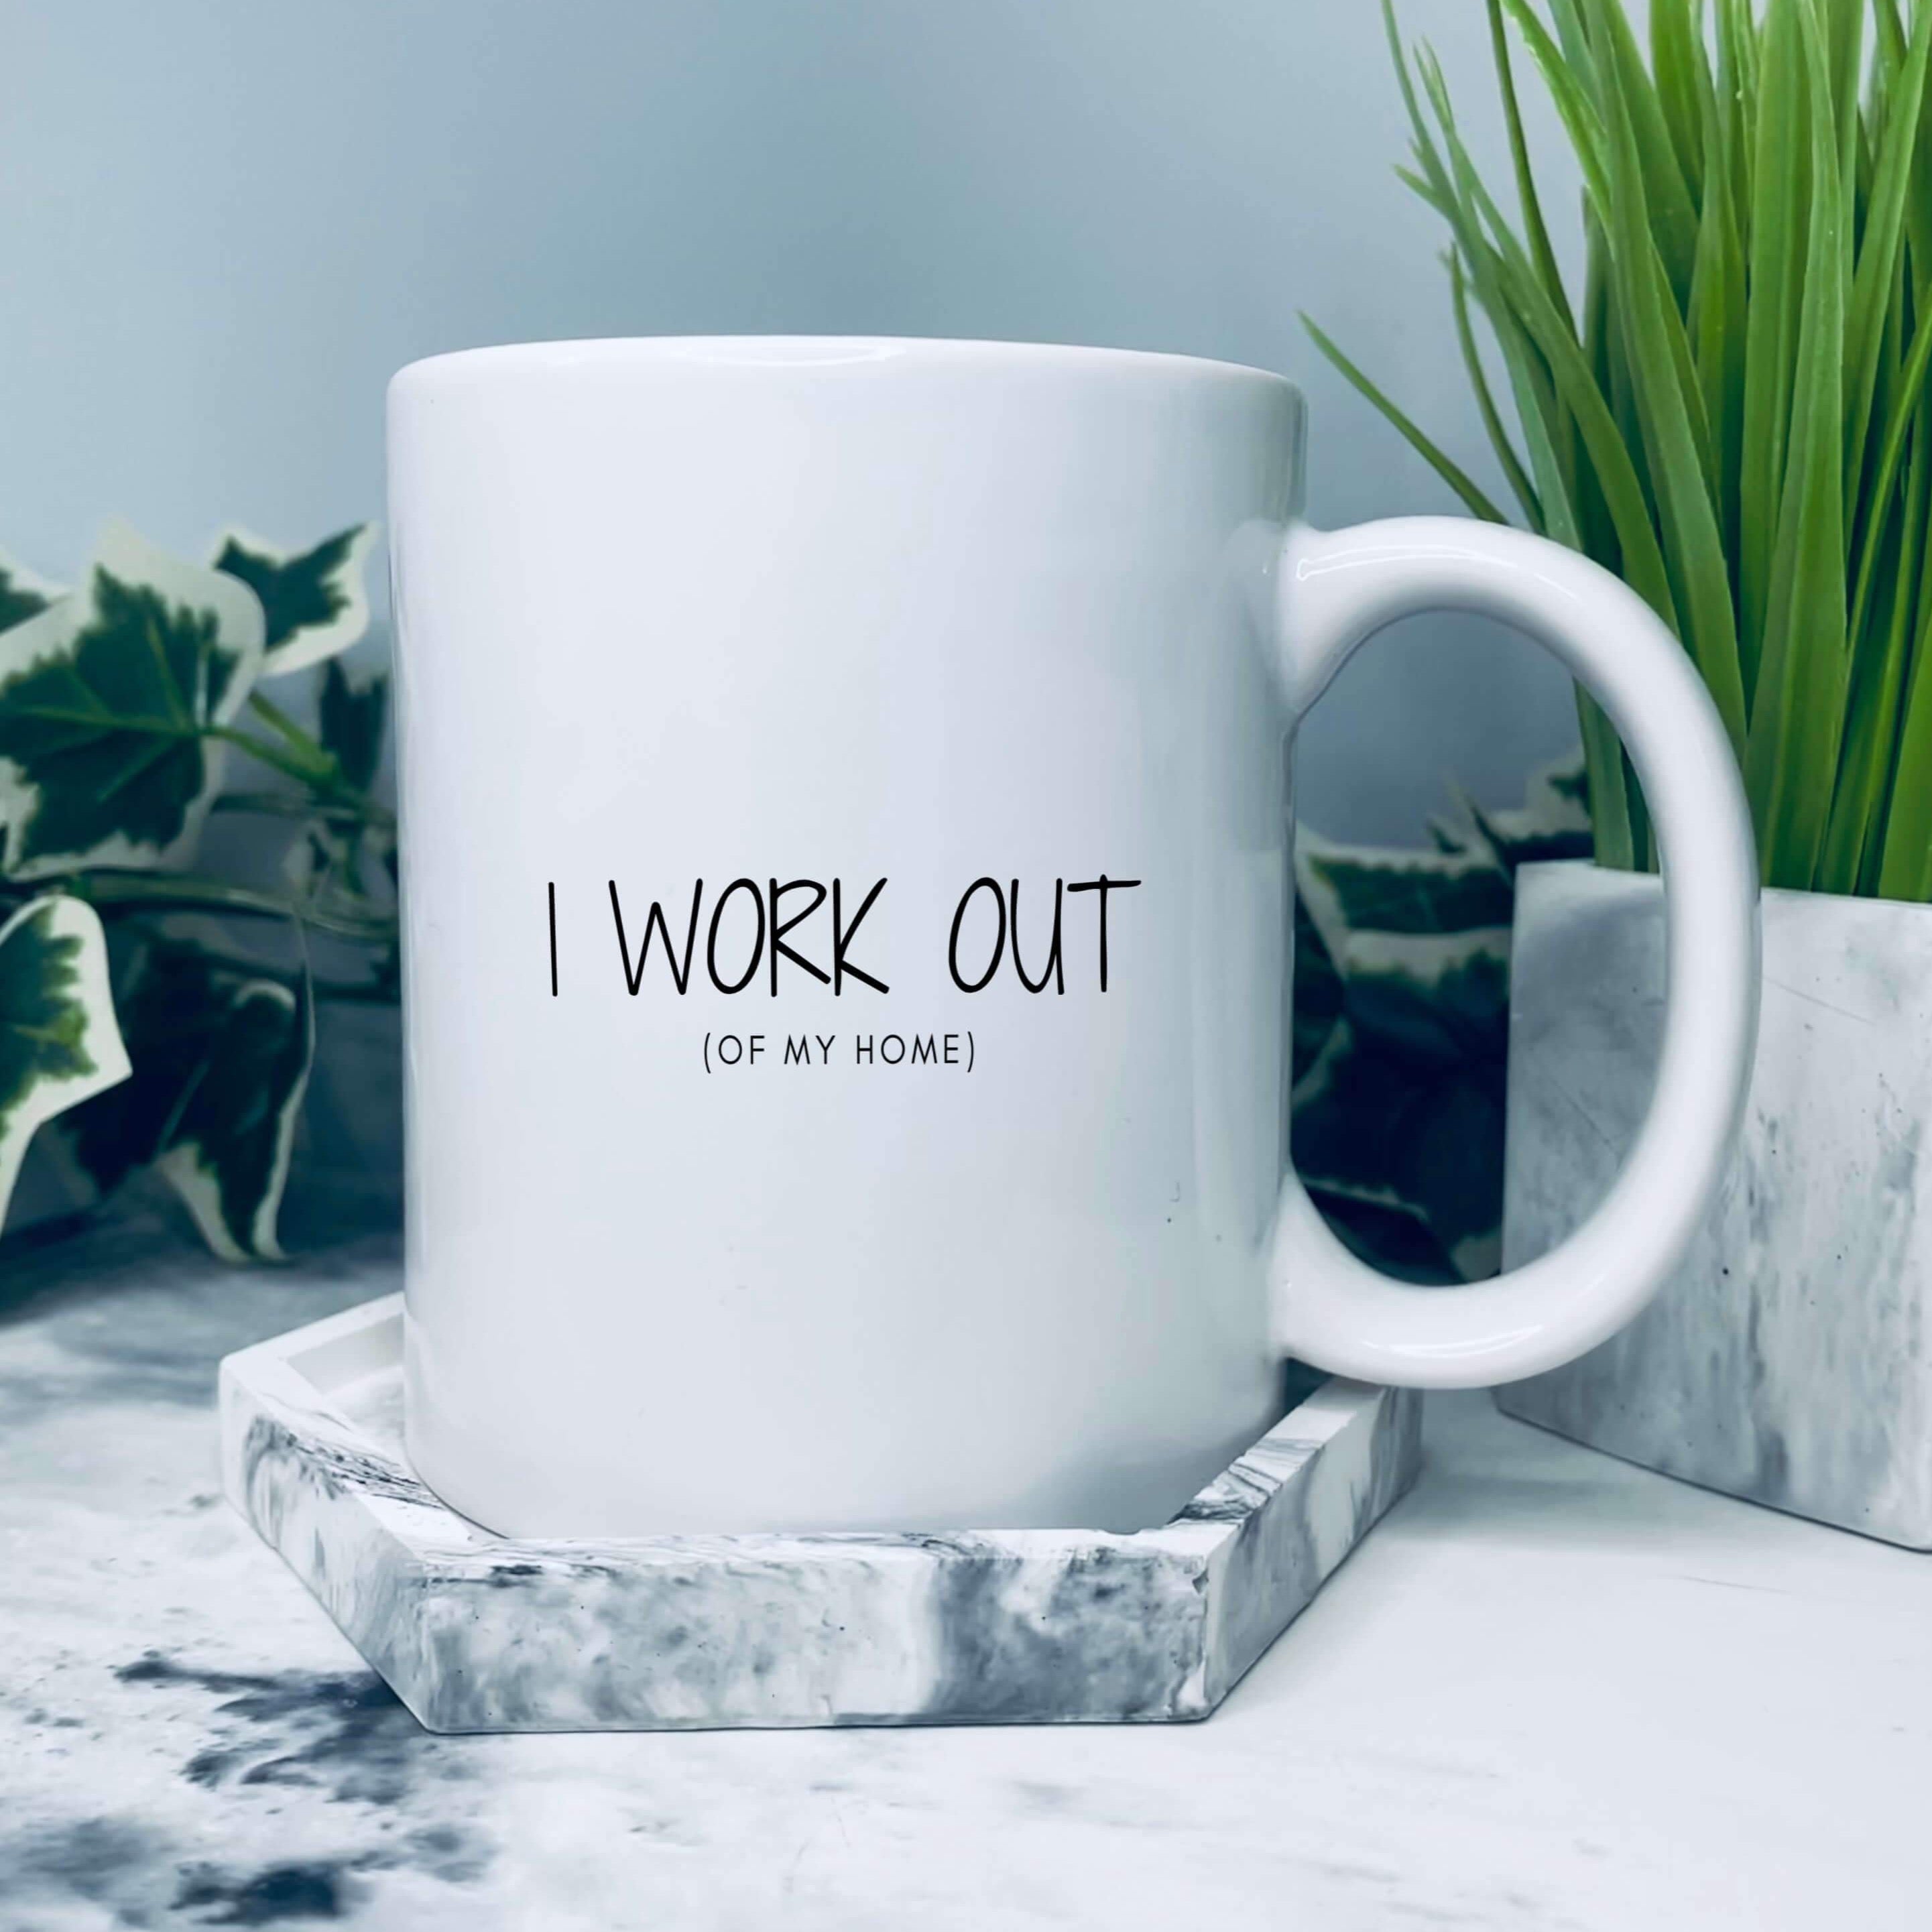 Mug with text on that says: I work out (of my home)